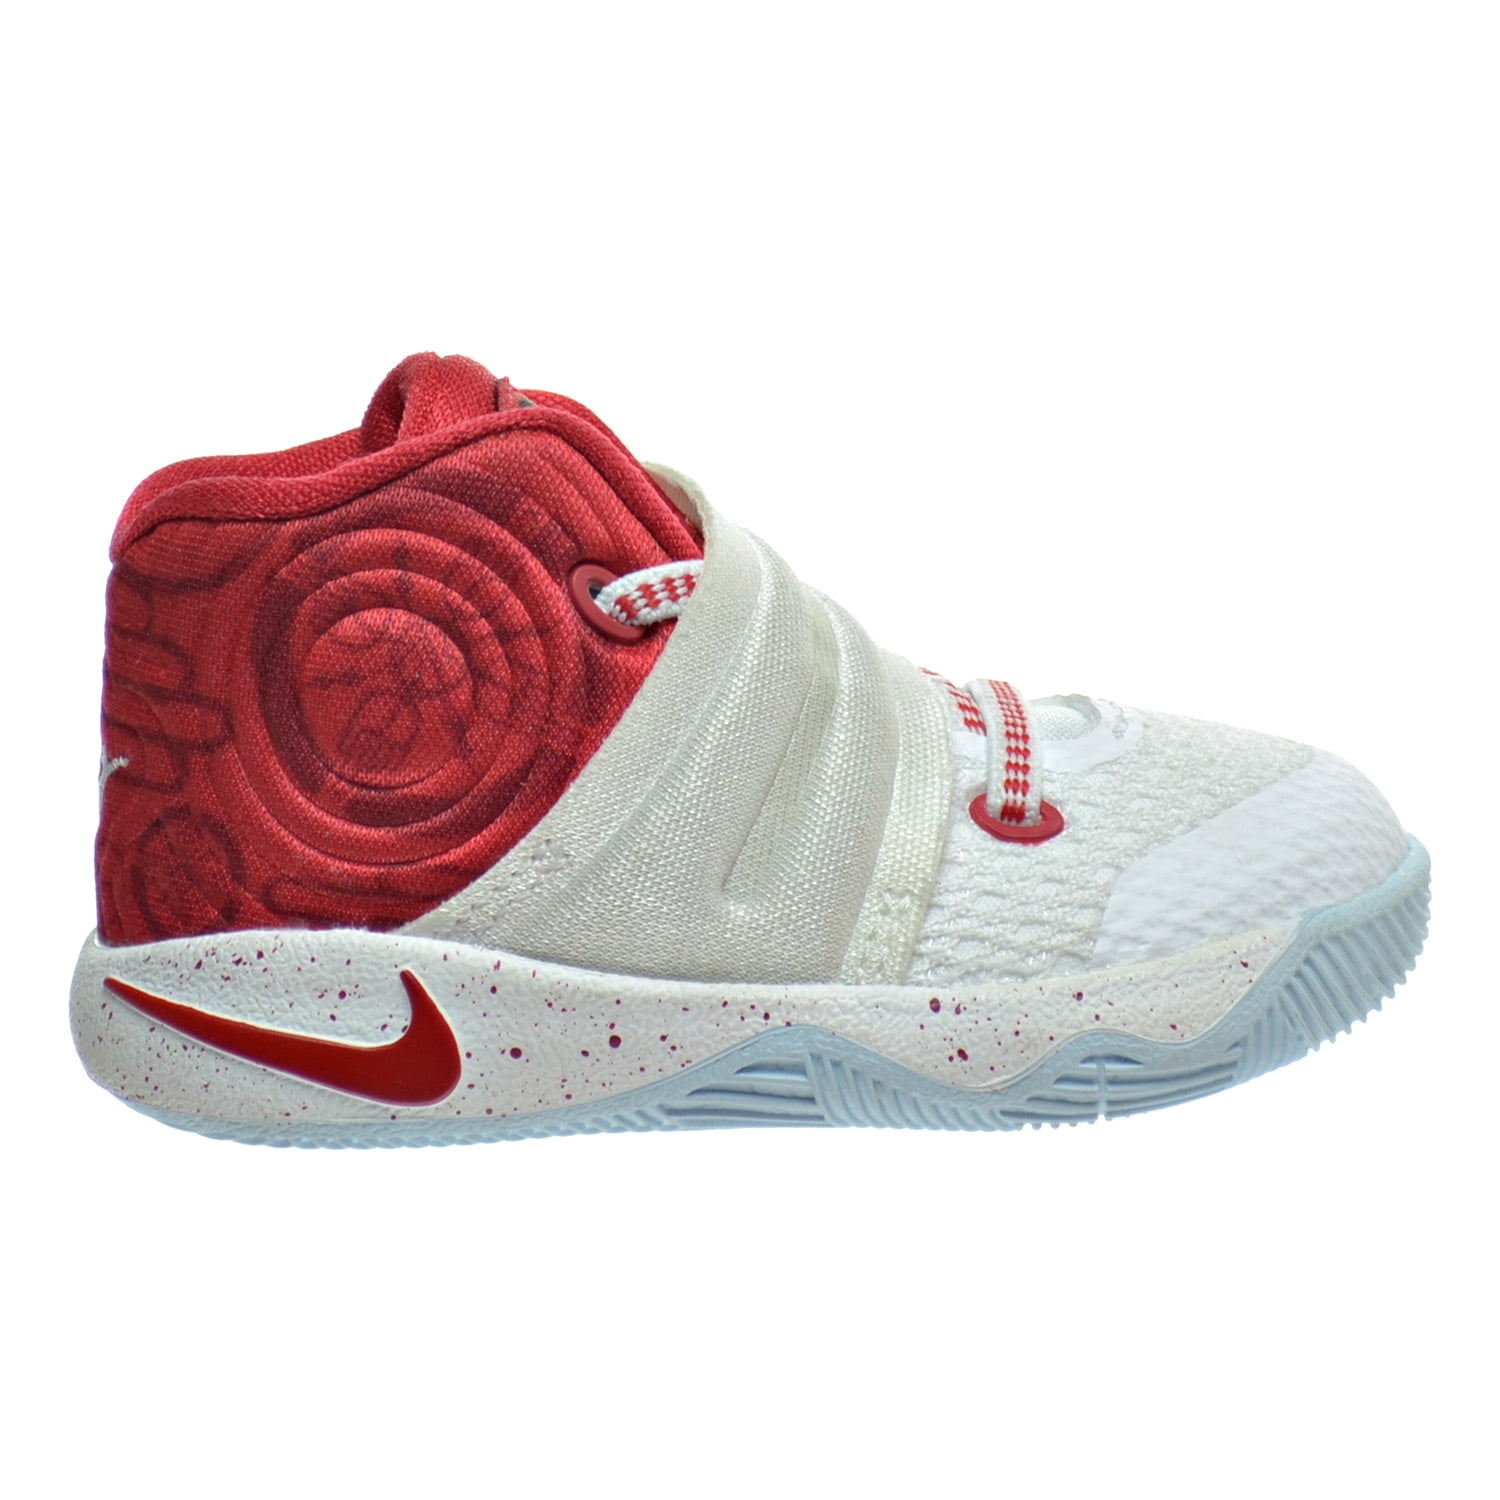 kyrie 2 toddler shoes